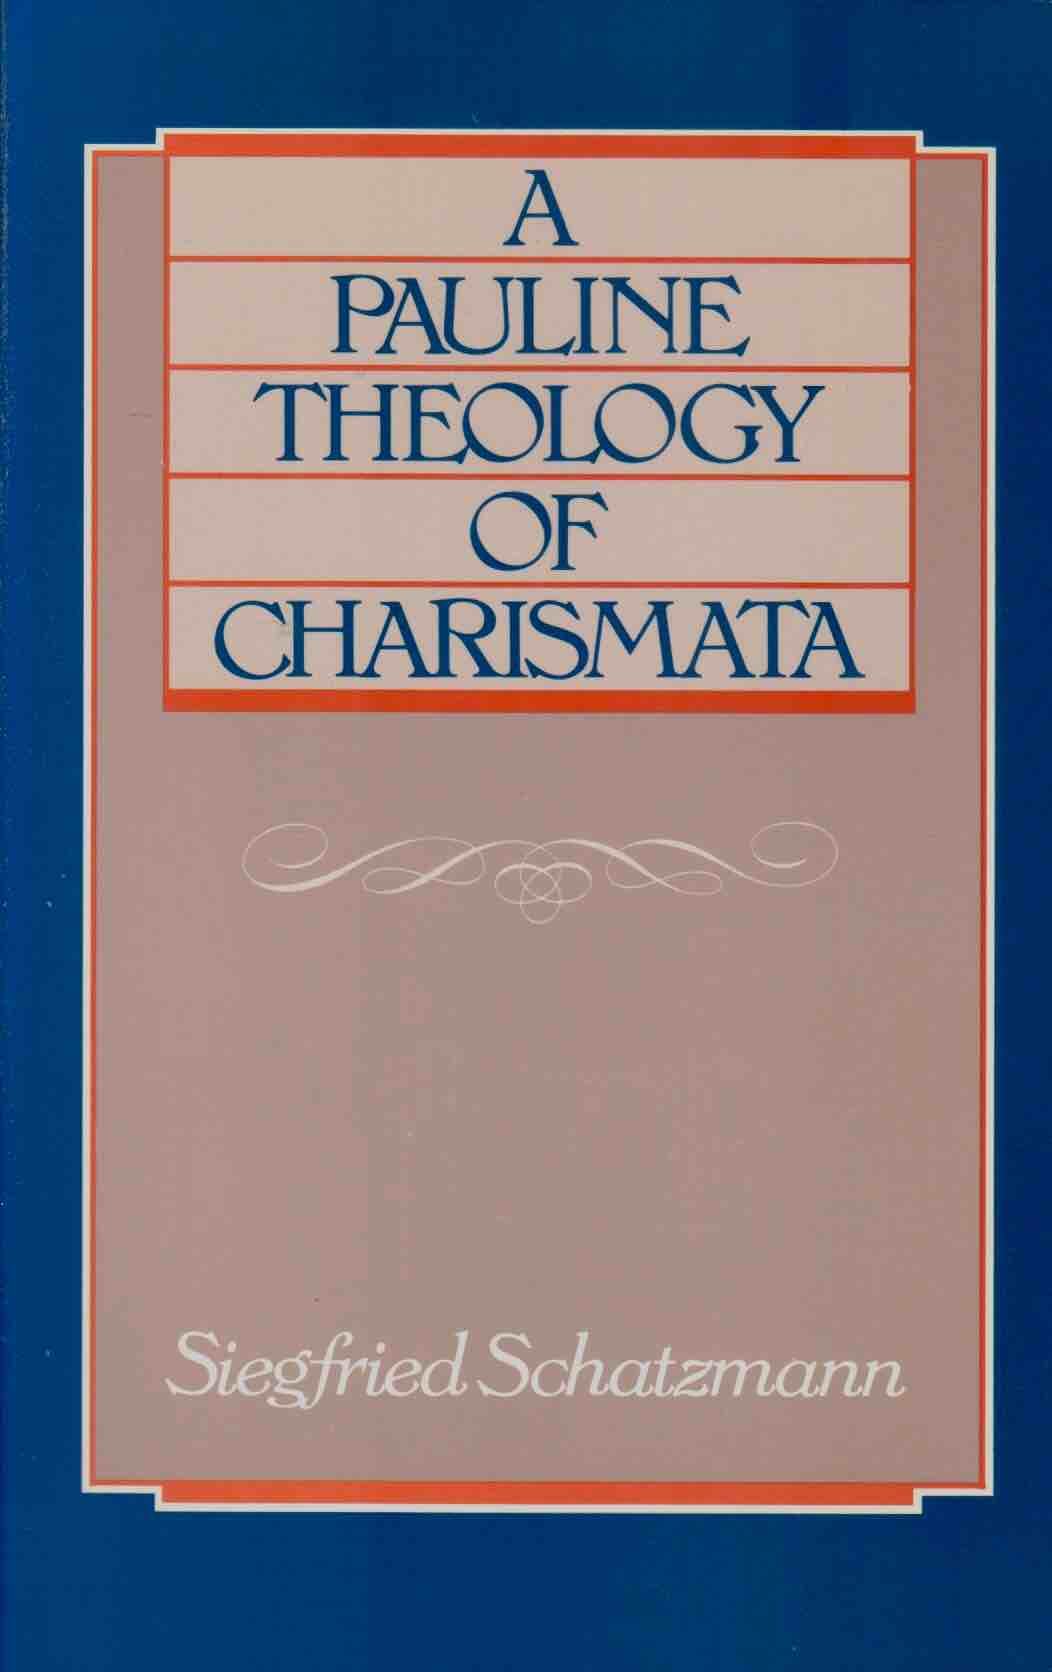 Cover of A Pauline Theology of Charismata